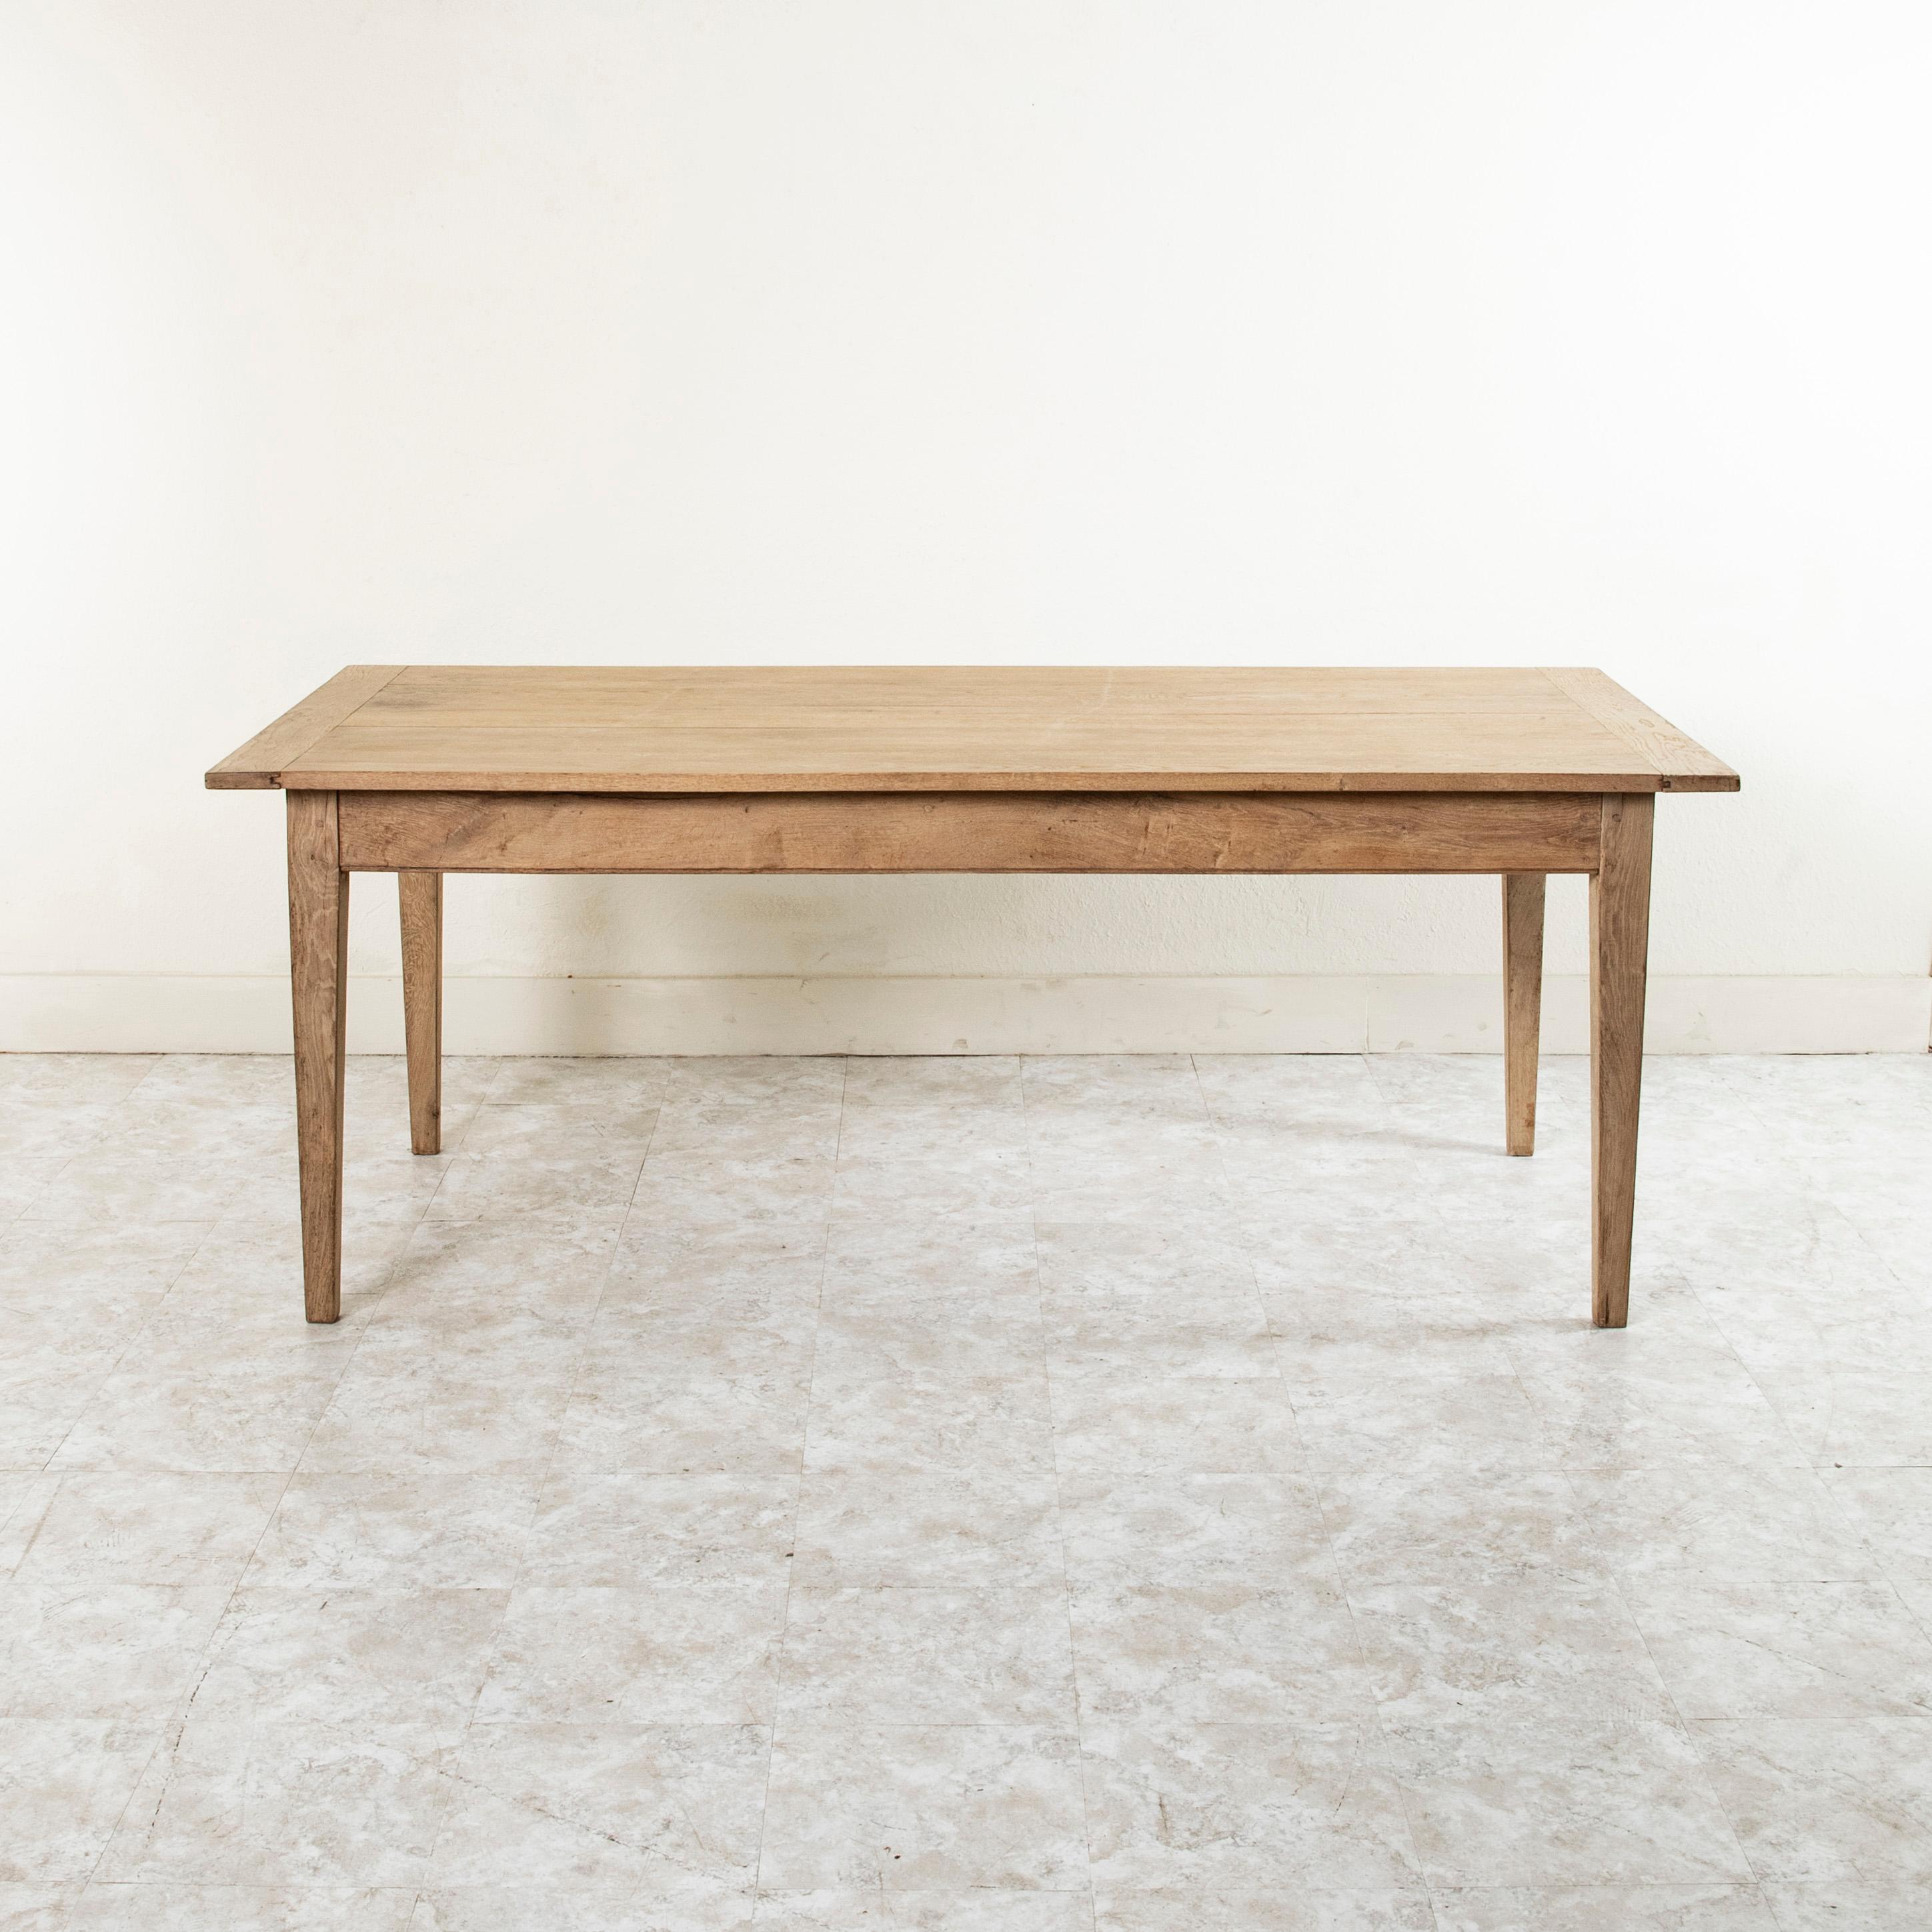 From the region of Le Perche in Normandy, France, this mid twentieth century bleached oak farm table or dining table features a single drawer at one end originally used to store the bread knife used to cut baguettes, a staple at every French meal.